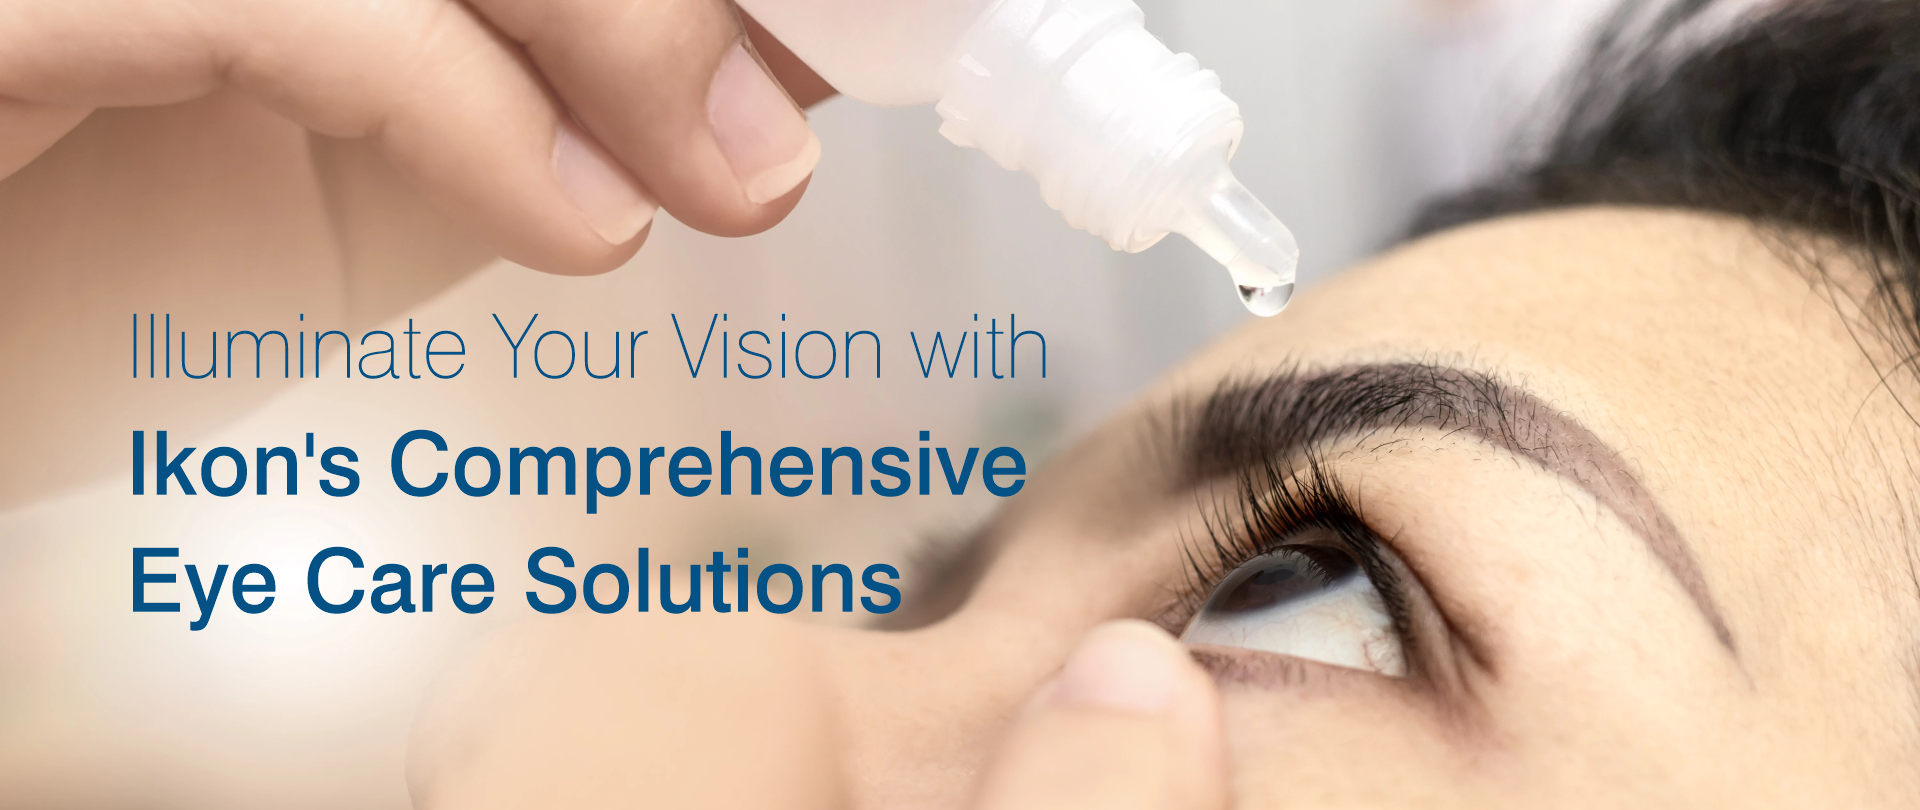 Best Comprehensive Eye Care Range for Brighter Tomorrow